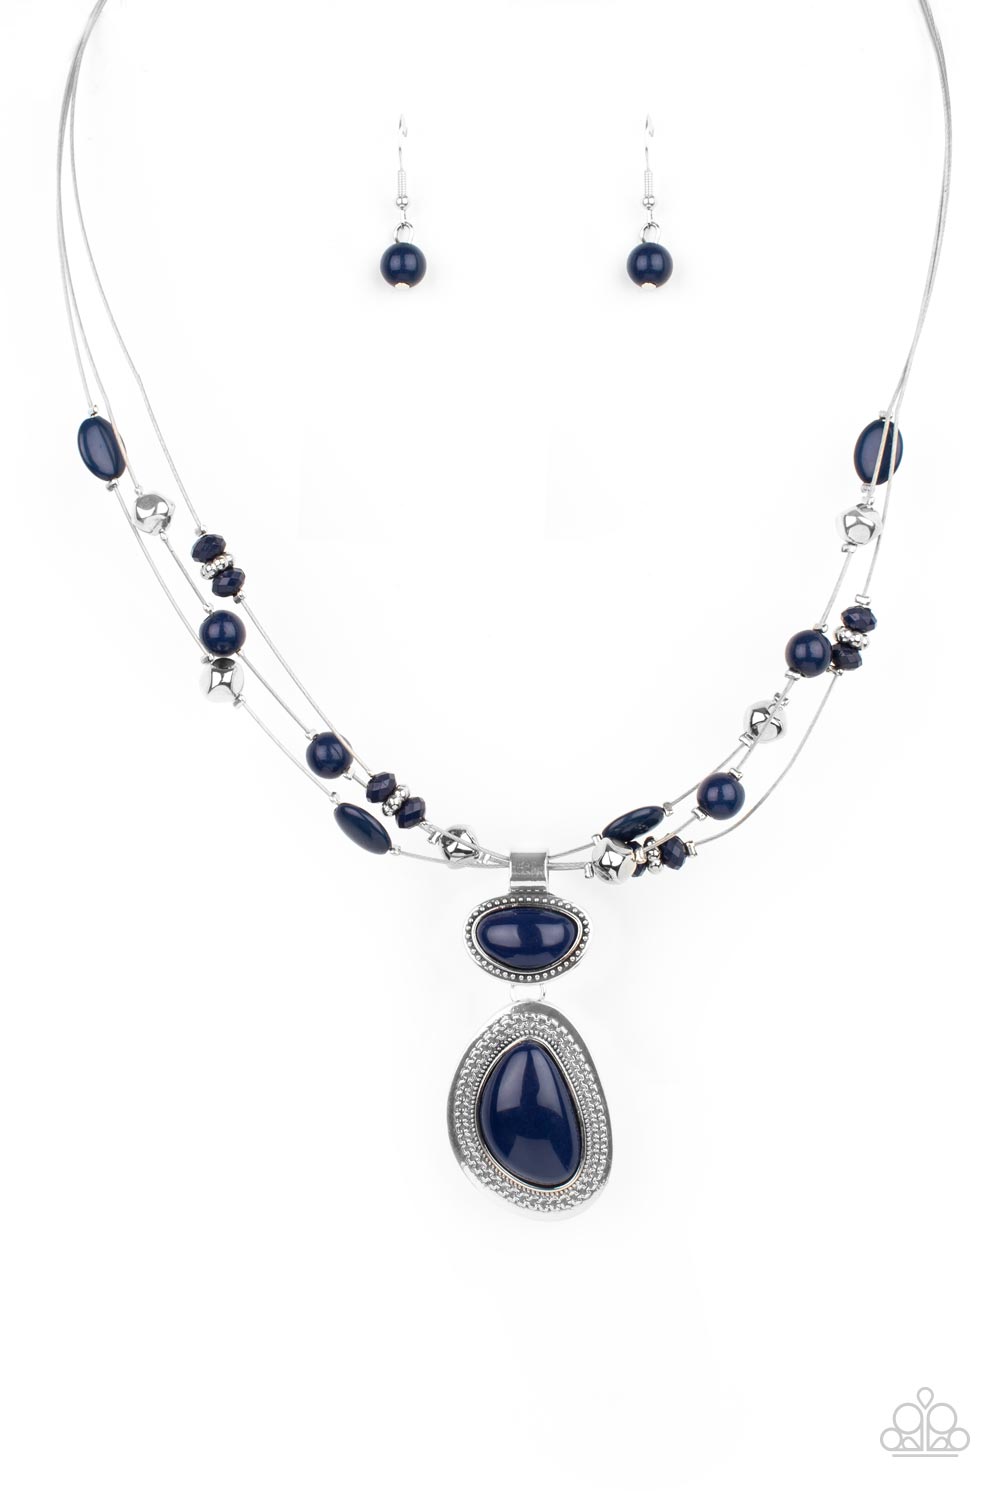 Paparazzi Accessories - Discovering New Destinations #N732 - Blue Necklace